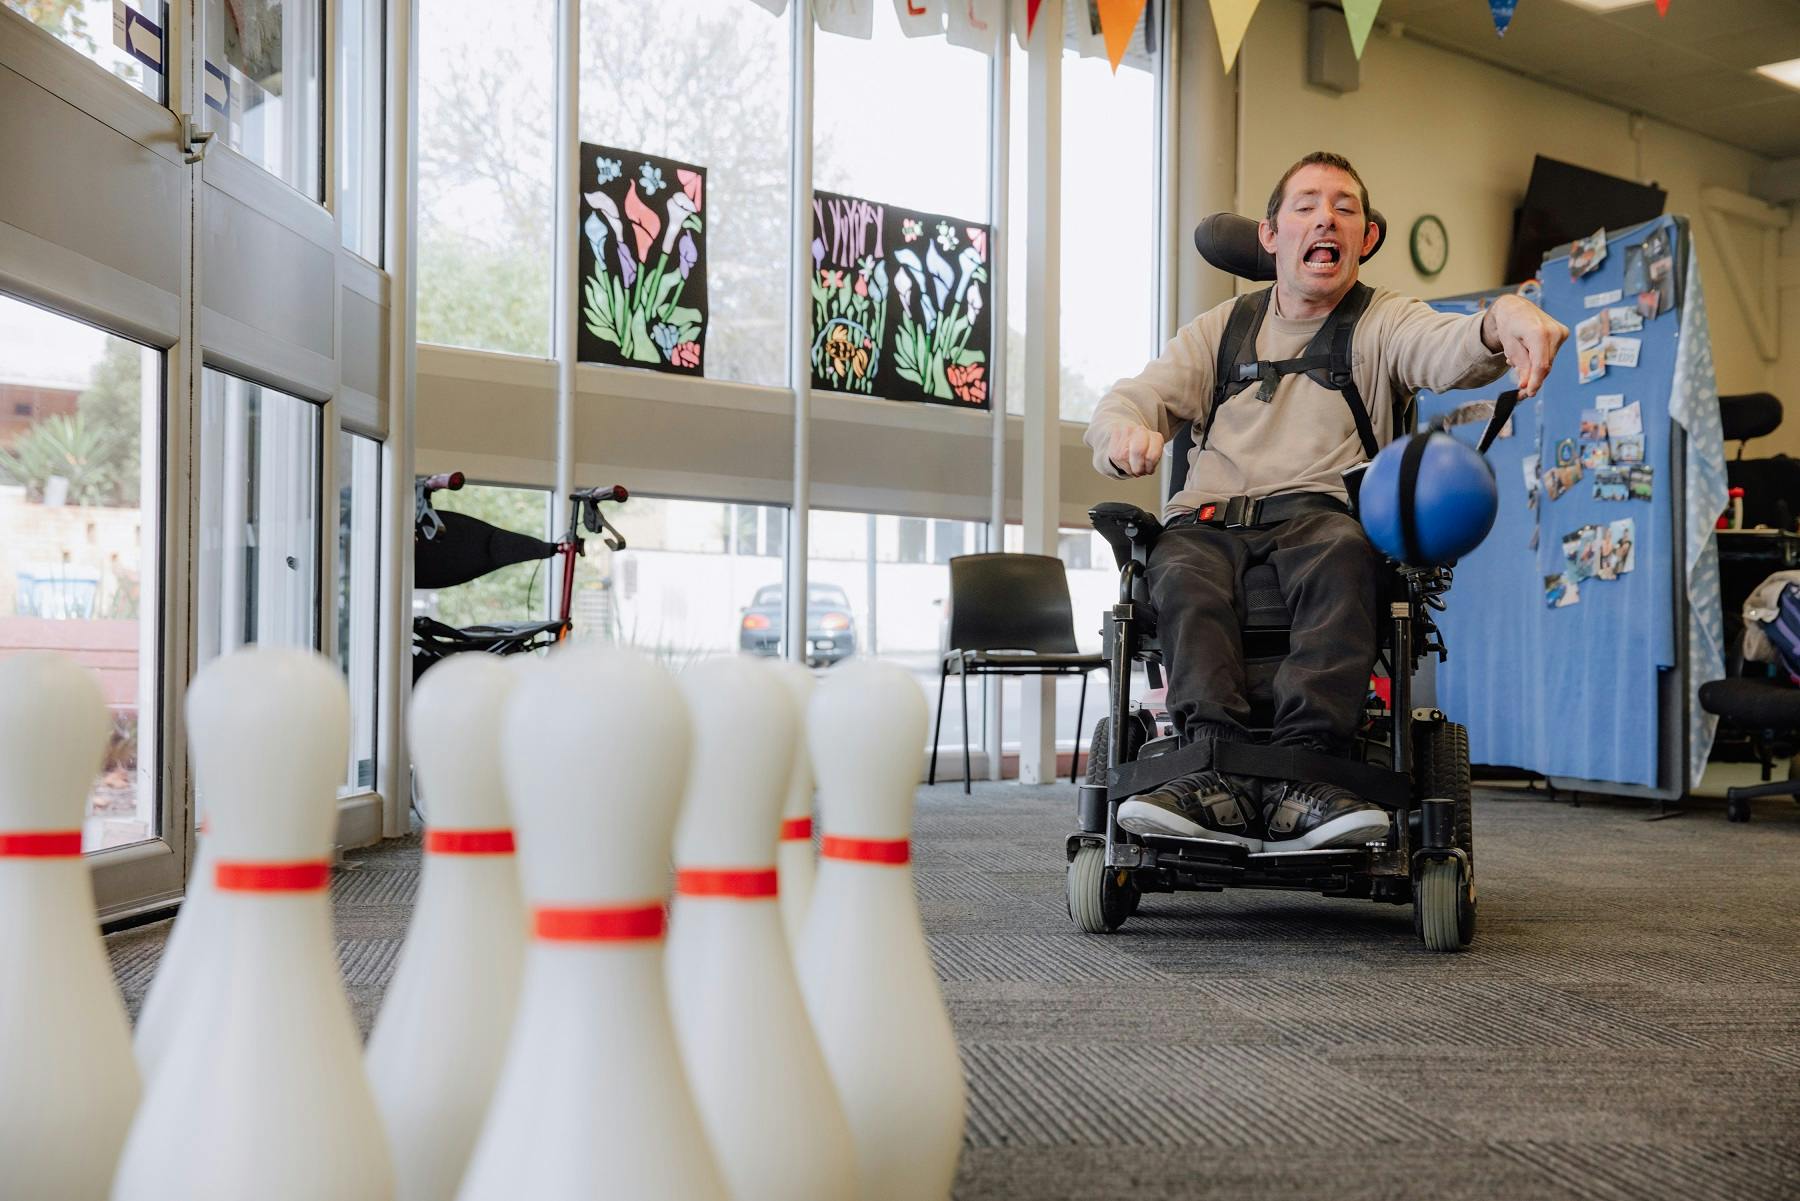 Image of a male playing tenpin bowling. He is smiling at the camera and using a wheelchair.